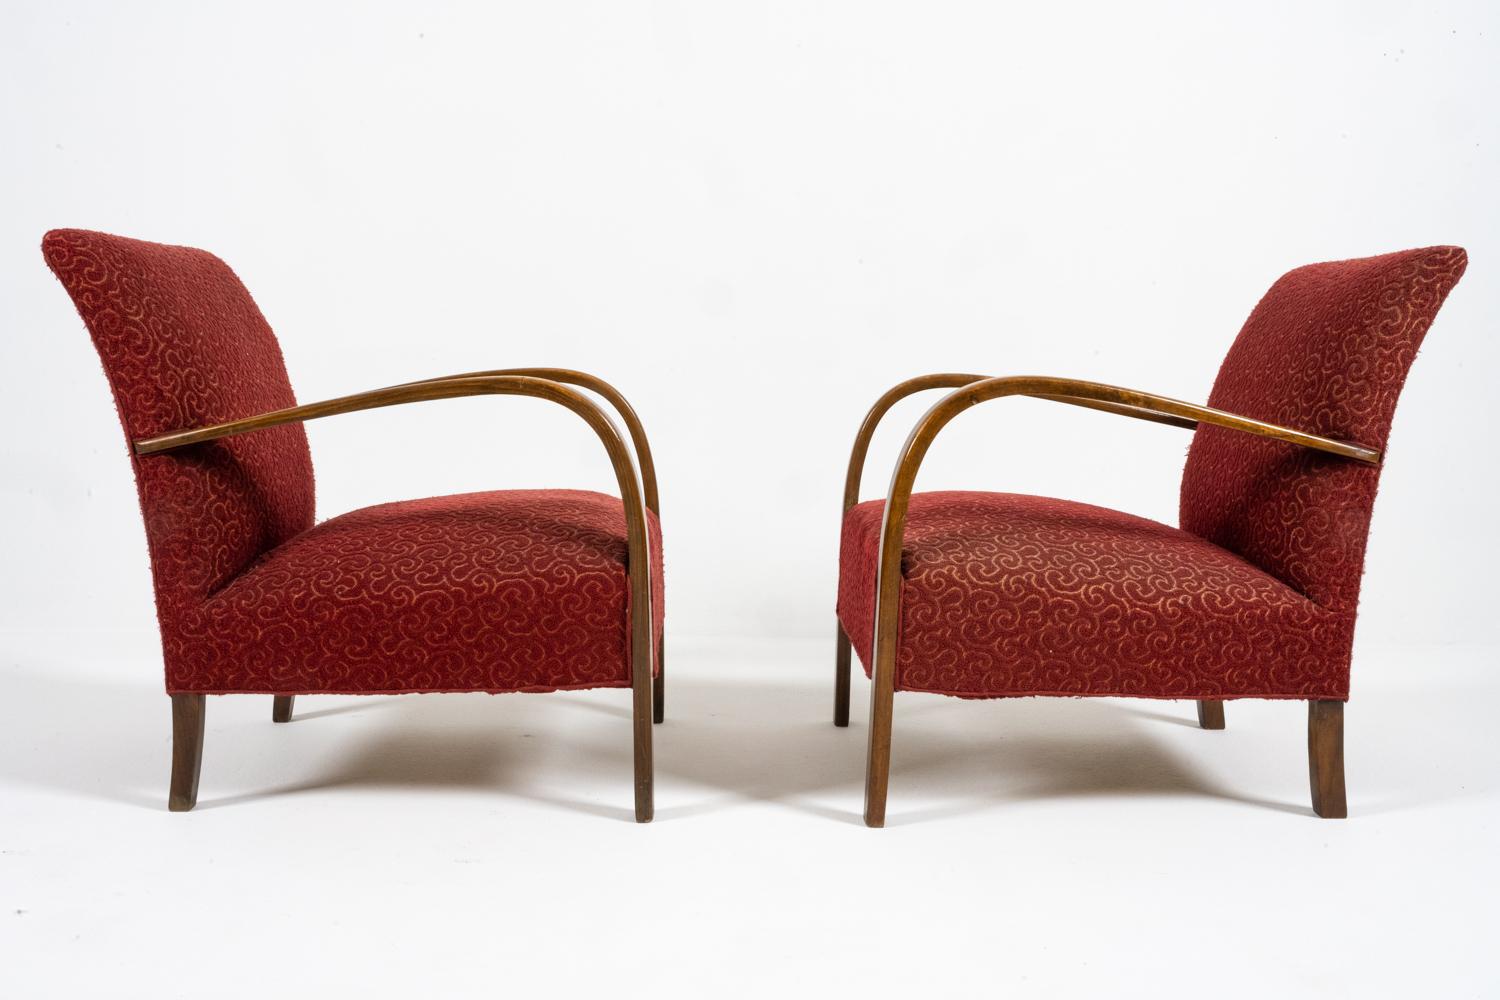 Pair of Danish Modern Lounge Chairs by Fritz Hansen, c. 1950s For Sale 1